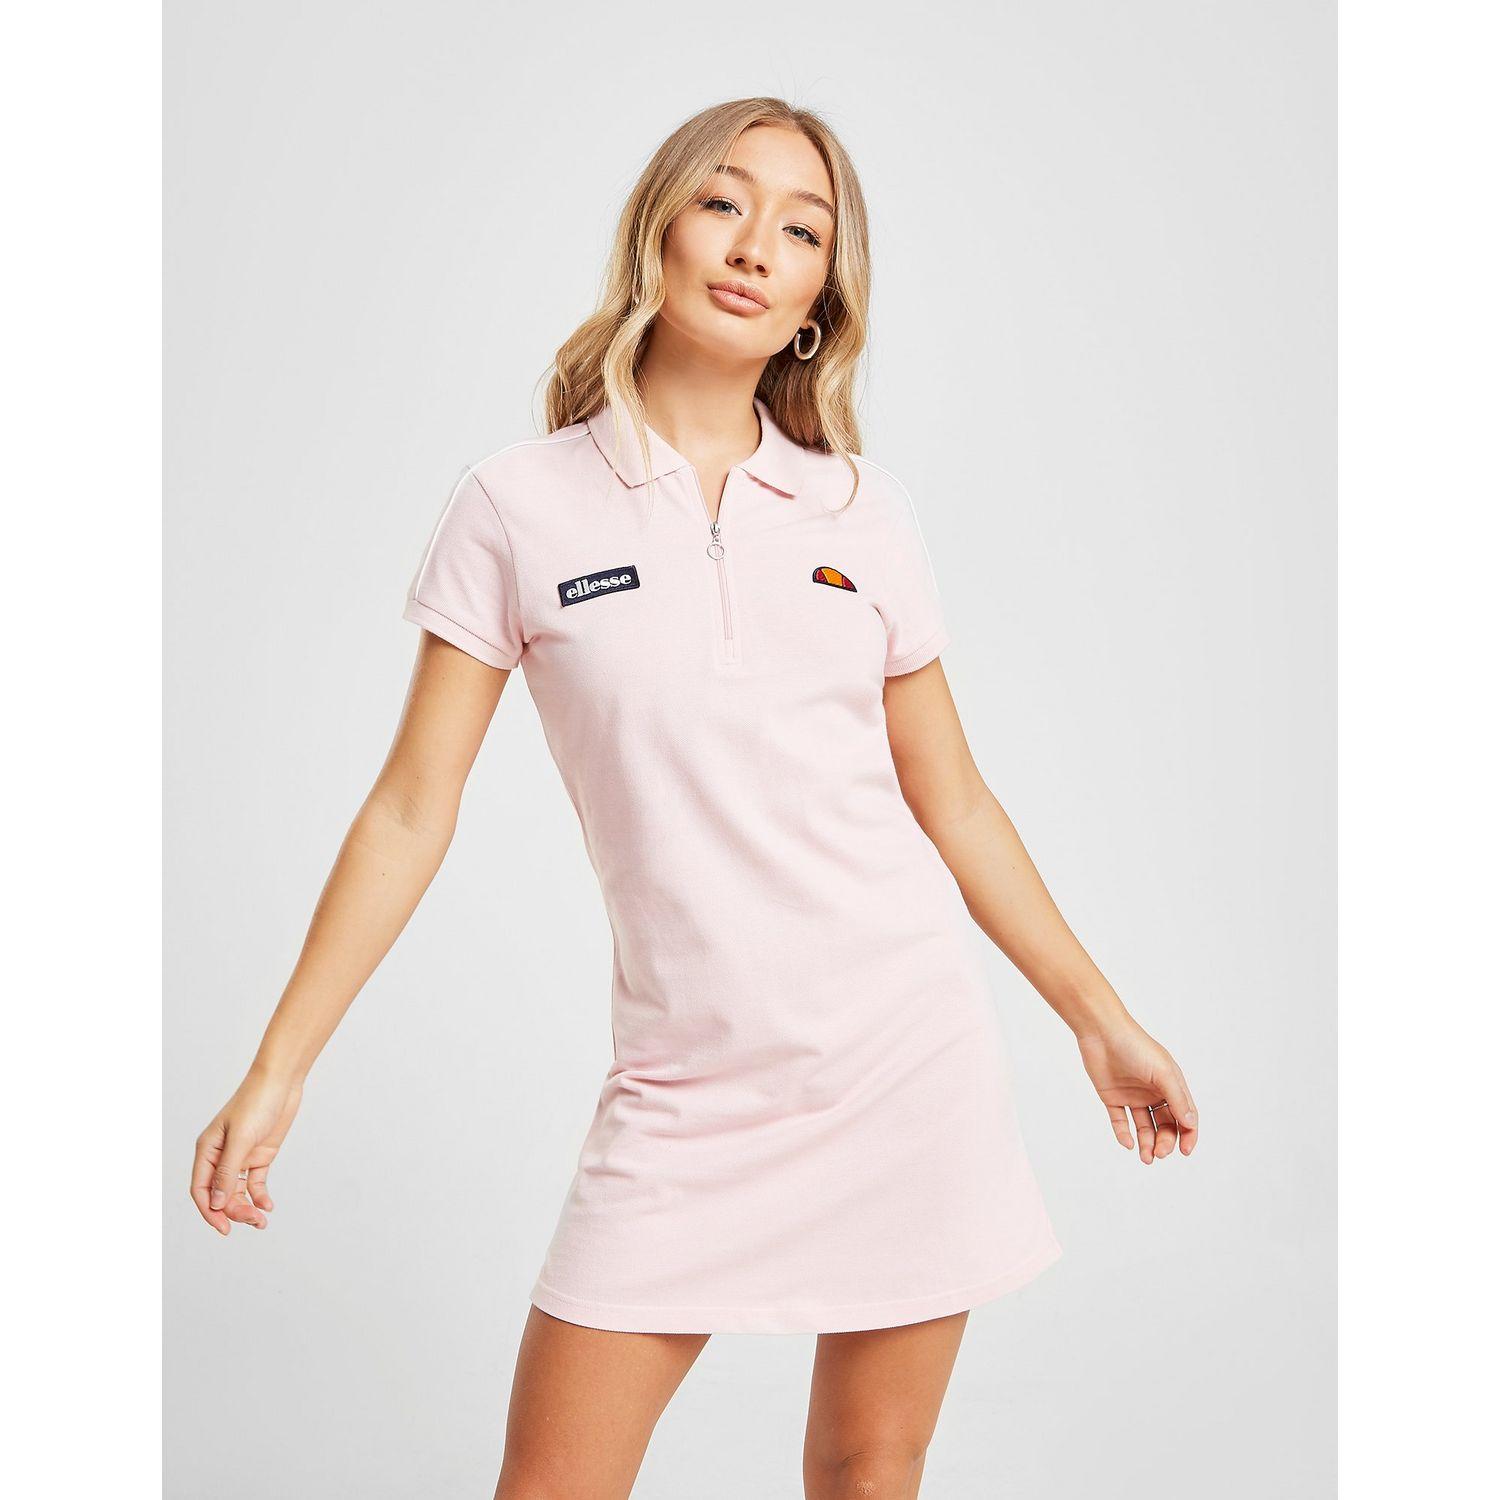 Ellesse Cotton Polo Shirt Dress in Pink 